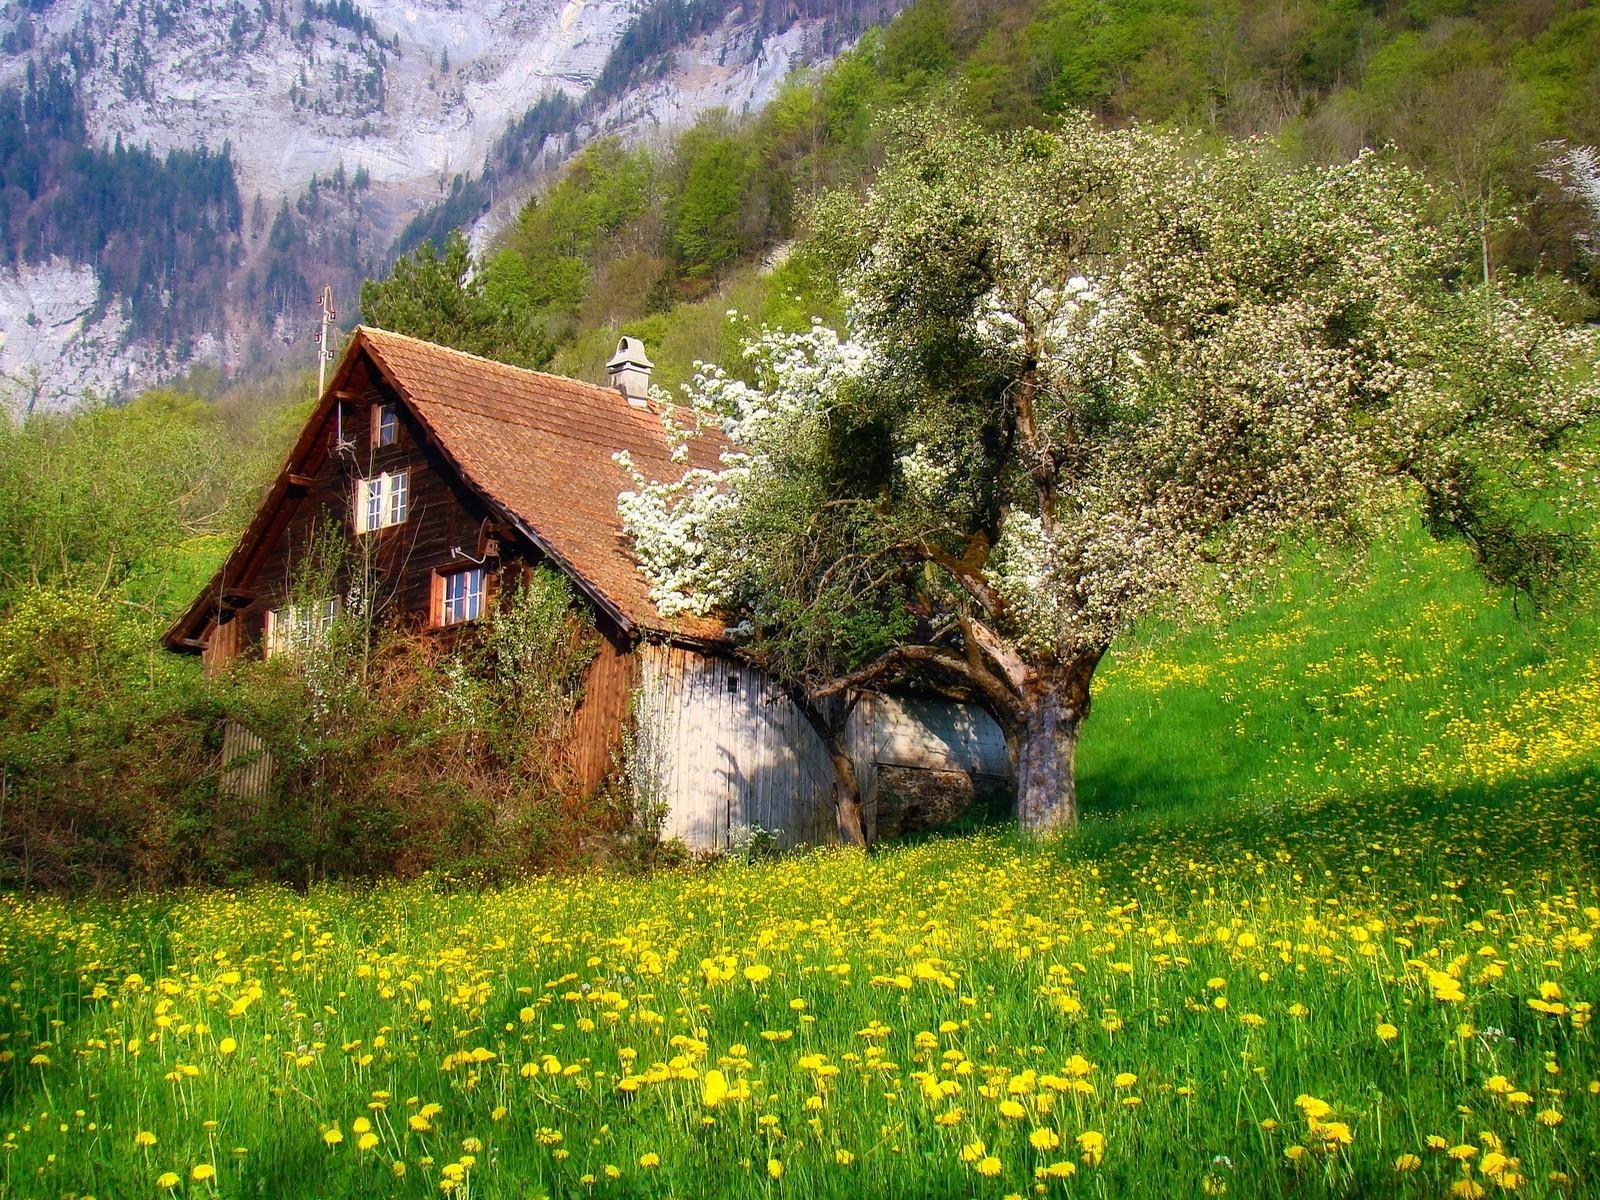 photography, Nature, Landscape, Cottage, Flowers, Spring, Mountains